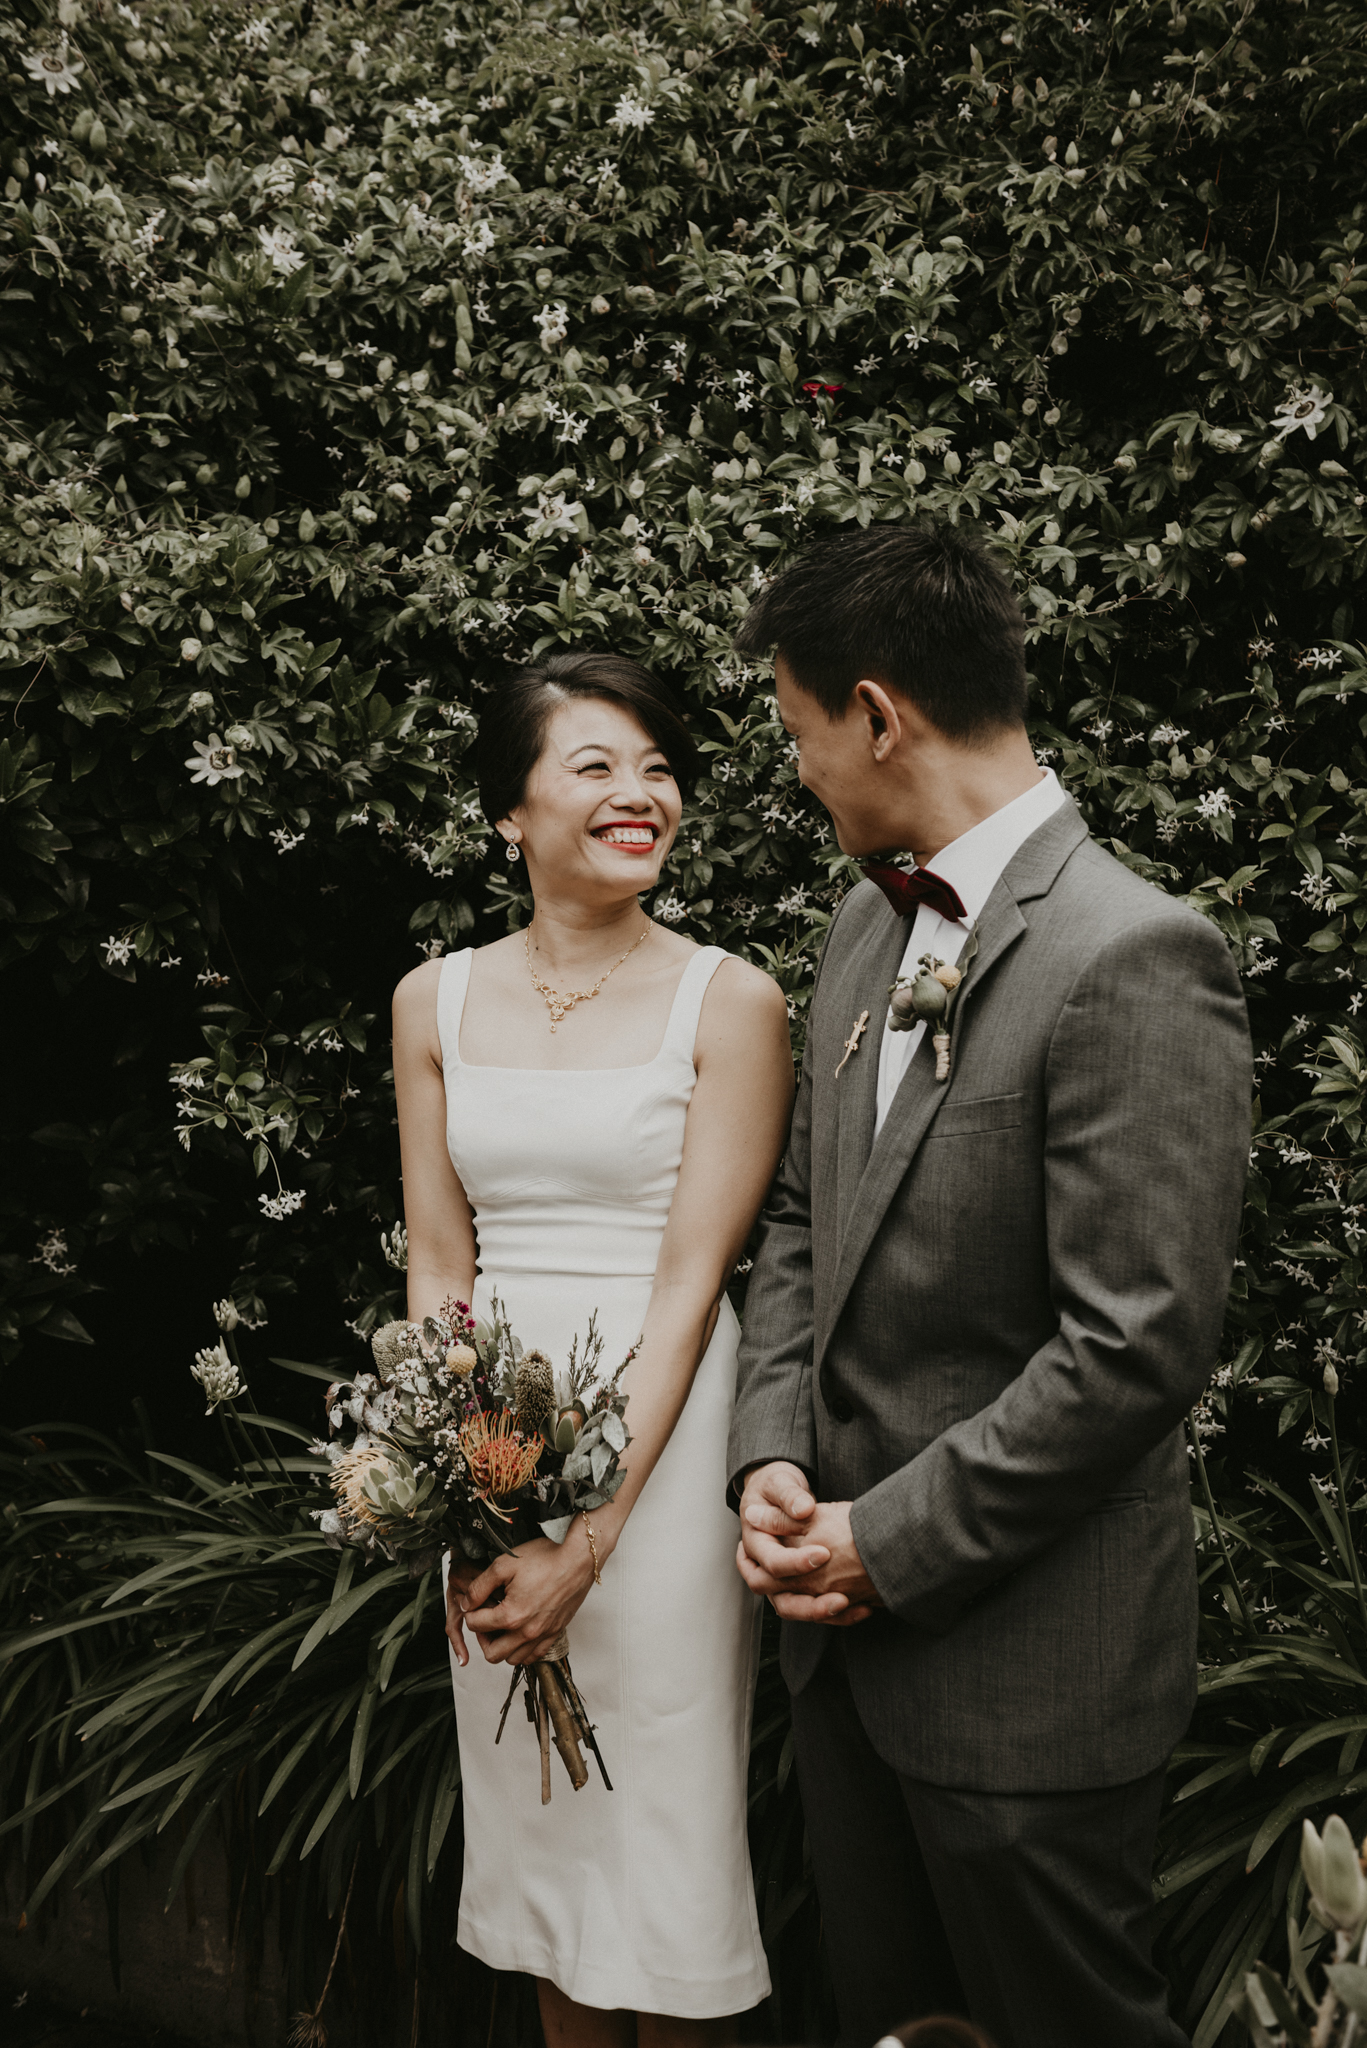 agnes-duy-15th-december-2018-chinese-vietnamese-wedding-tea-ceremony-yarraville-home-house-documentary-candid-photographer-sarah-matler-photography-66